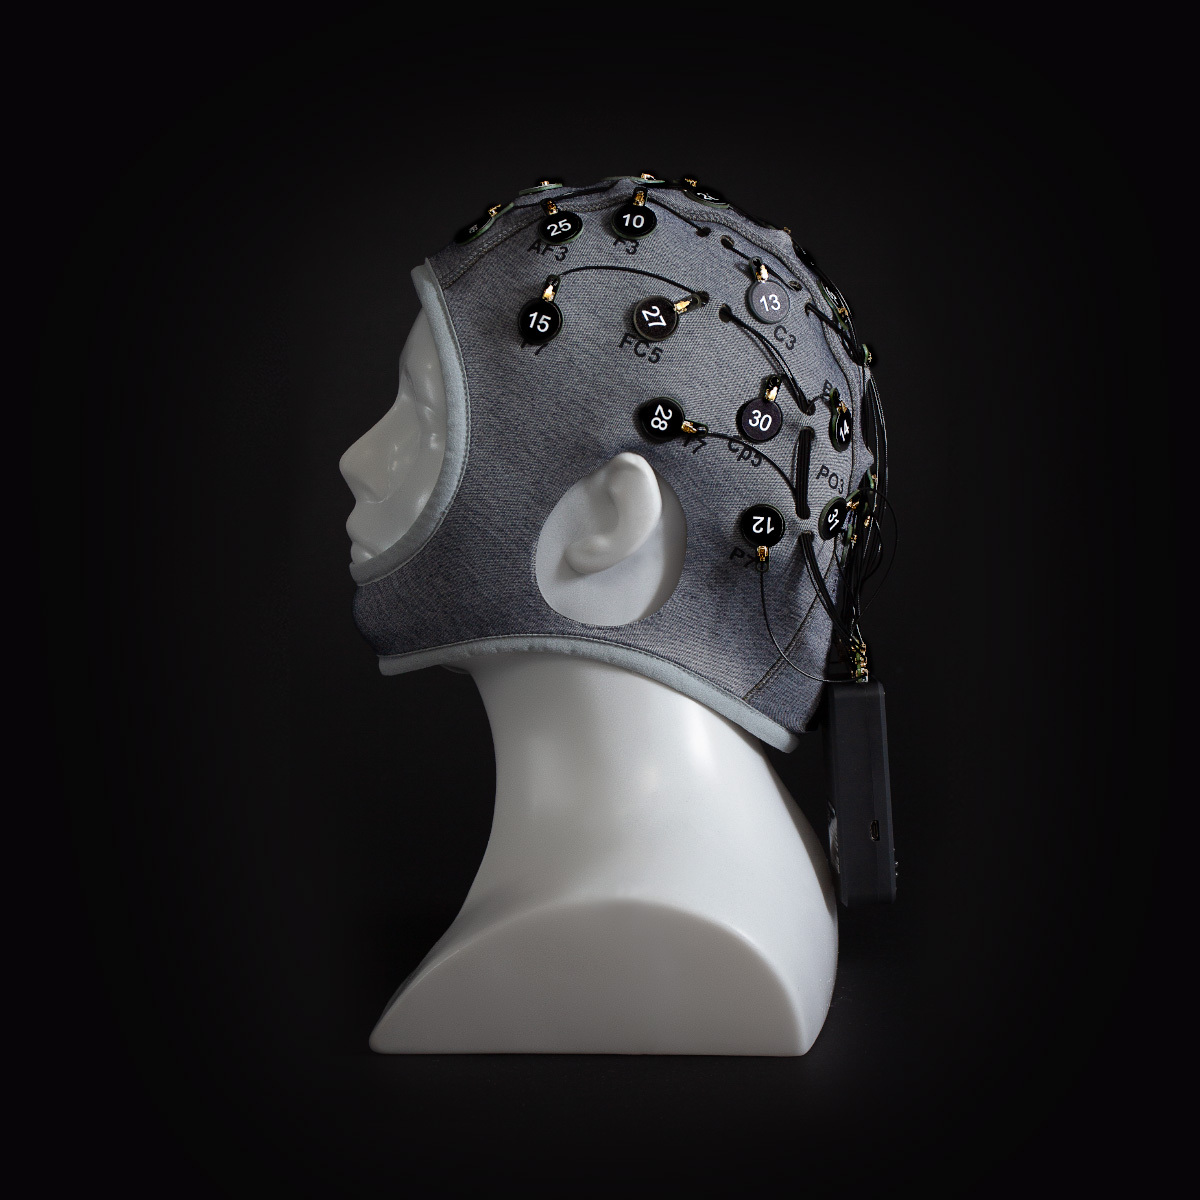 Neurotechnology Updates BrainAccess Products for EEG and Hyperscanning Applications